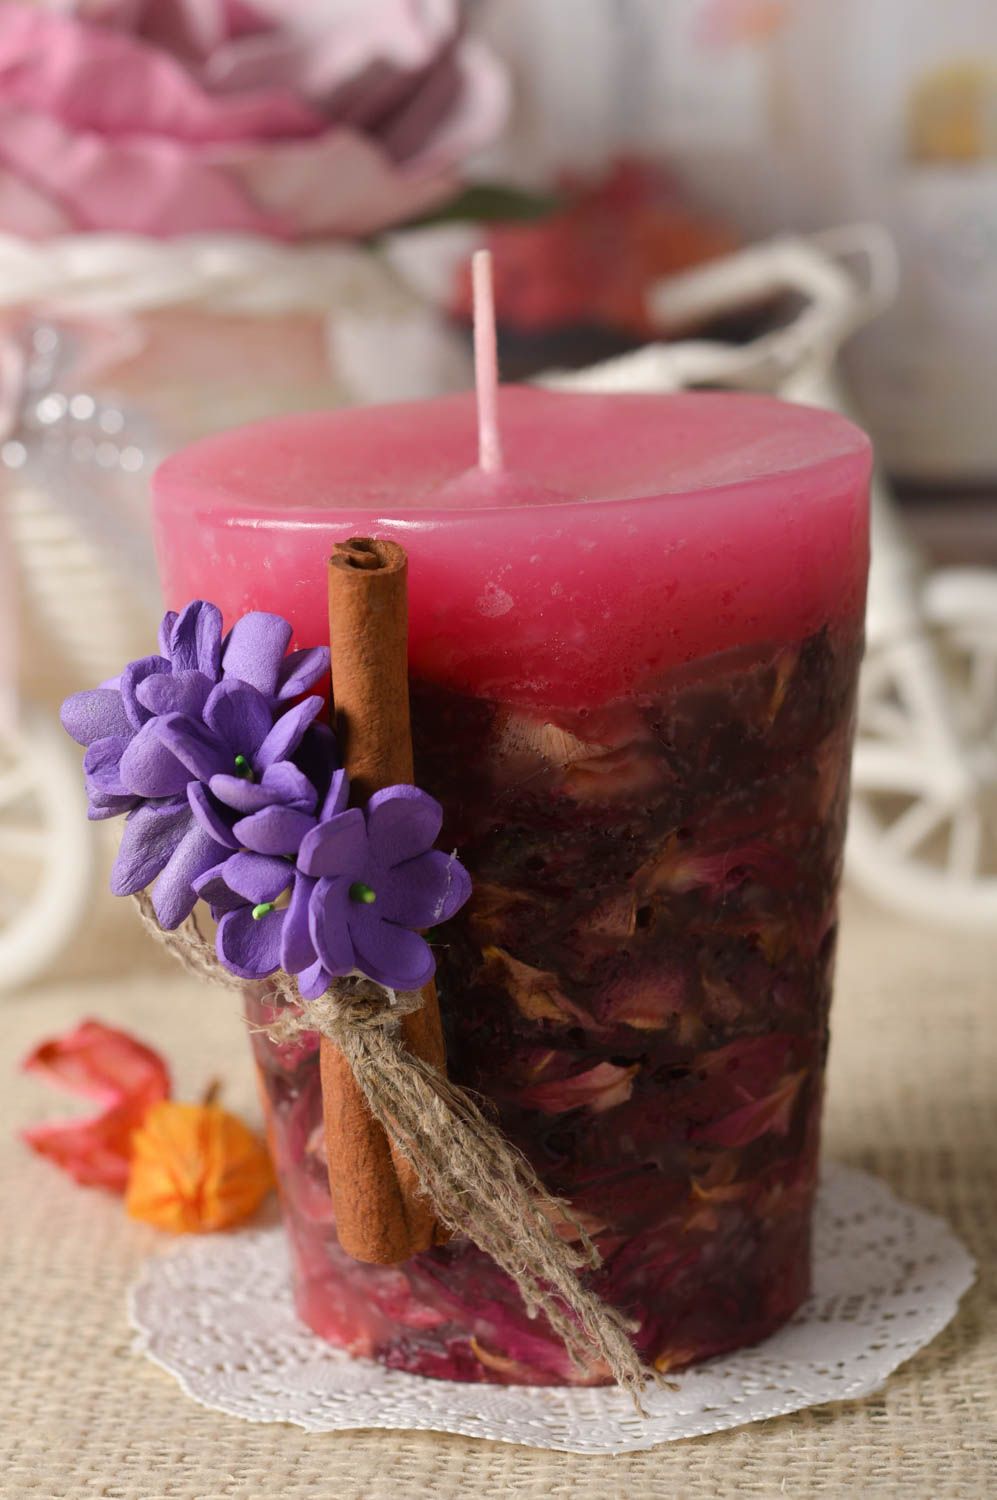 Candele Decorate – Gift idea: decorated candles – Sweetbiodesign  SweetbioDesign